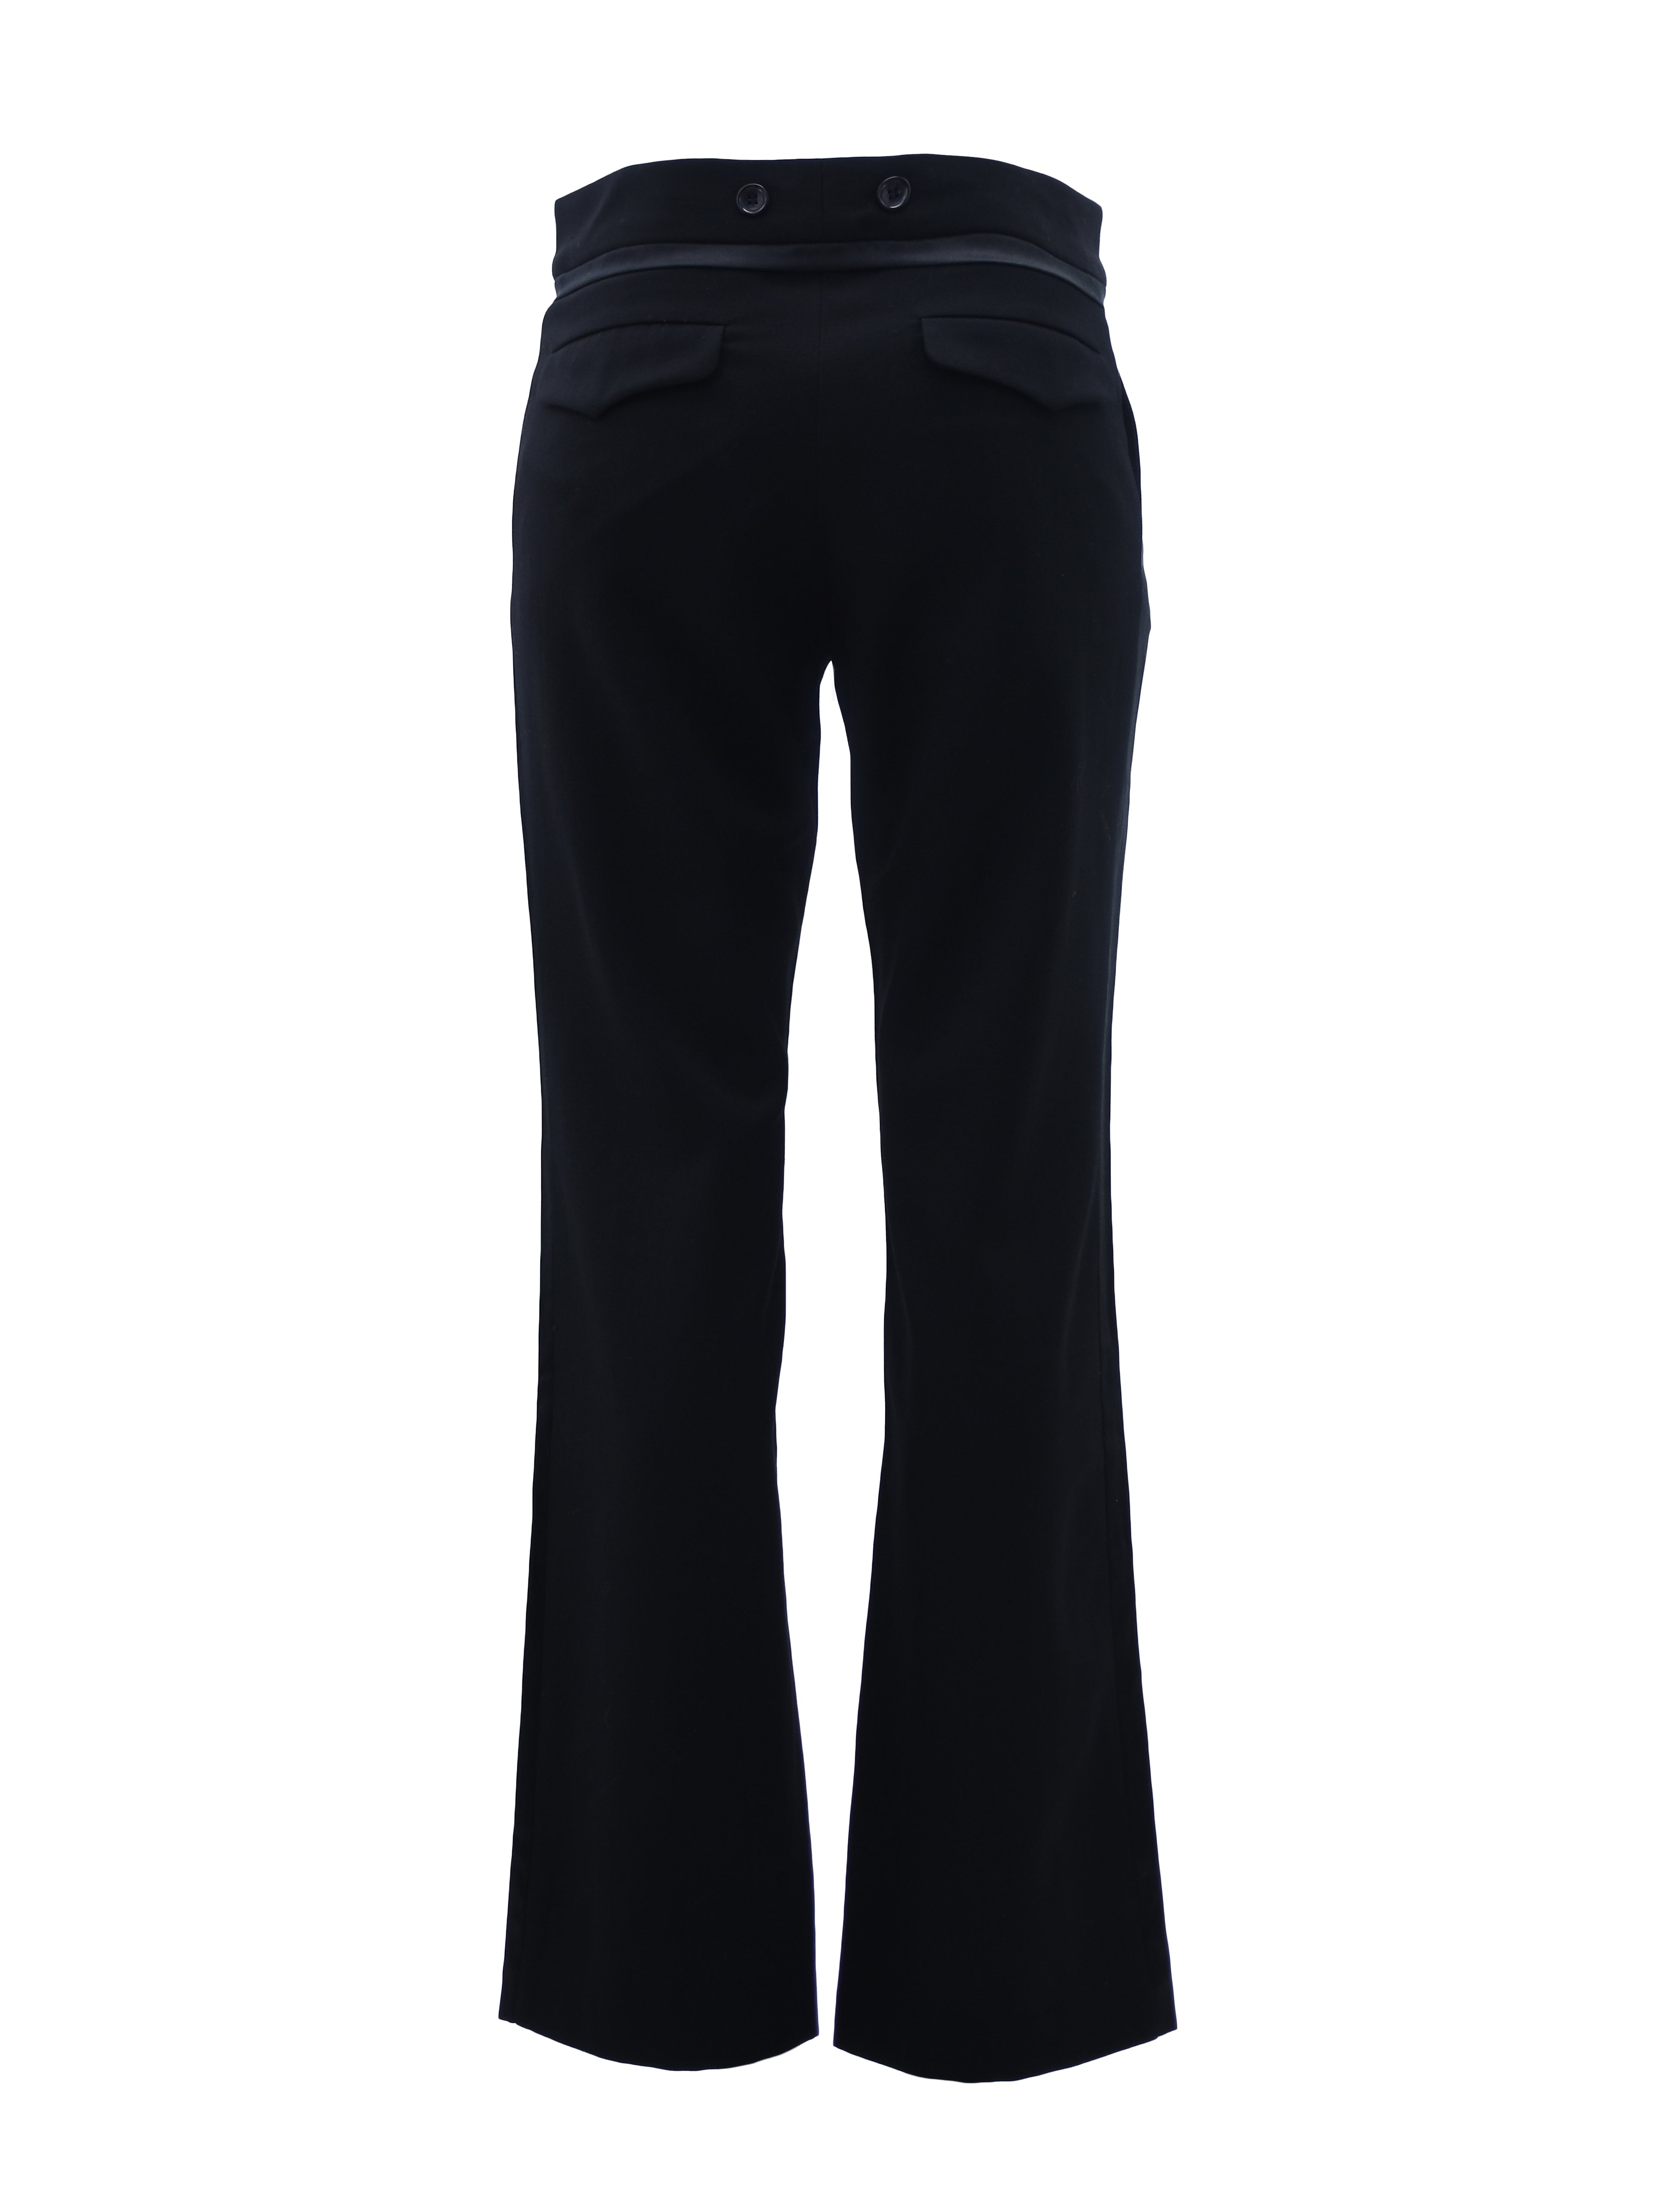 BLACK WOOL SUIT TROUSERS WITH BUTTON DETAILING